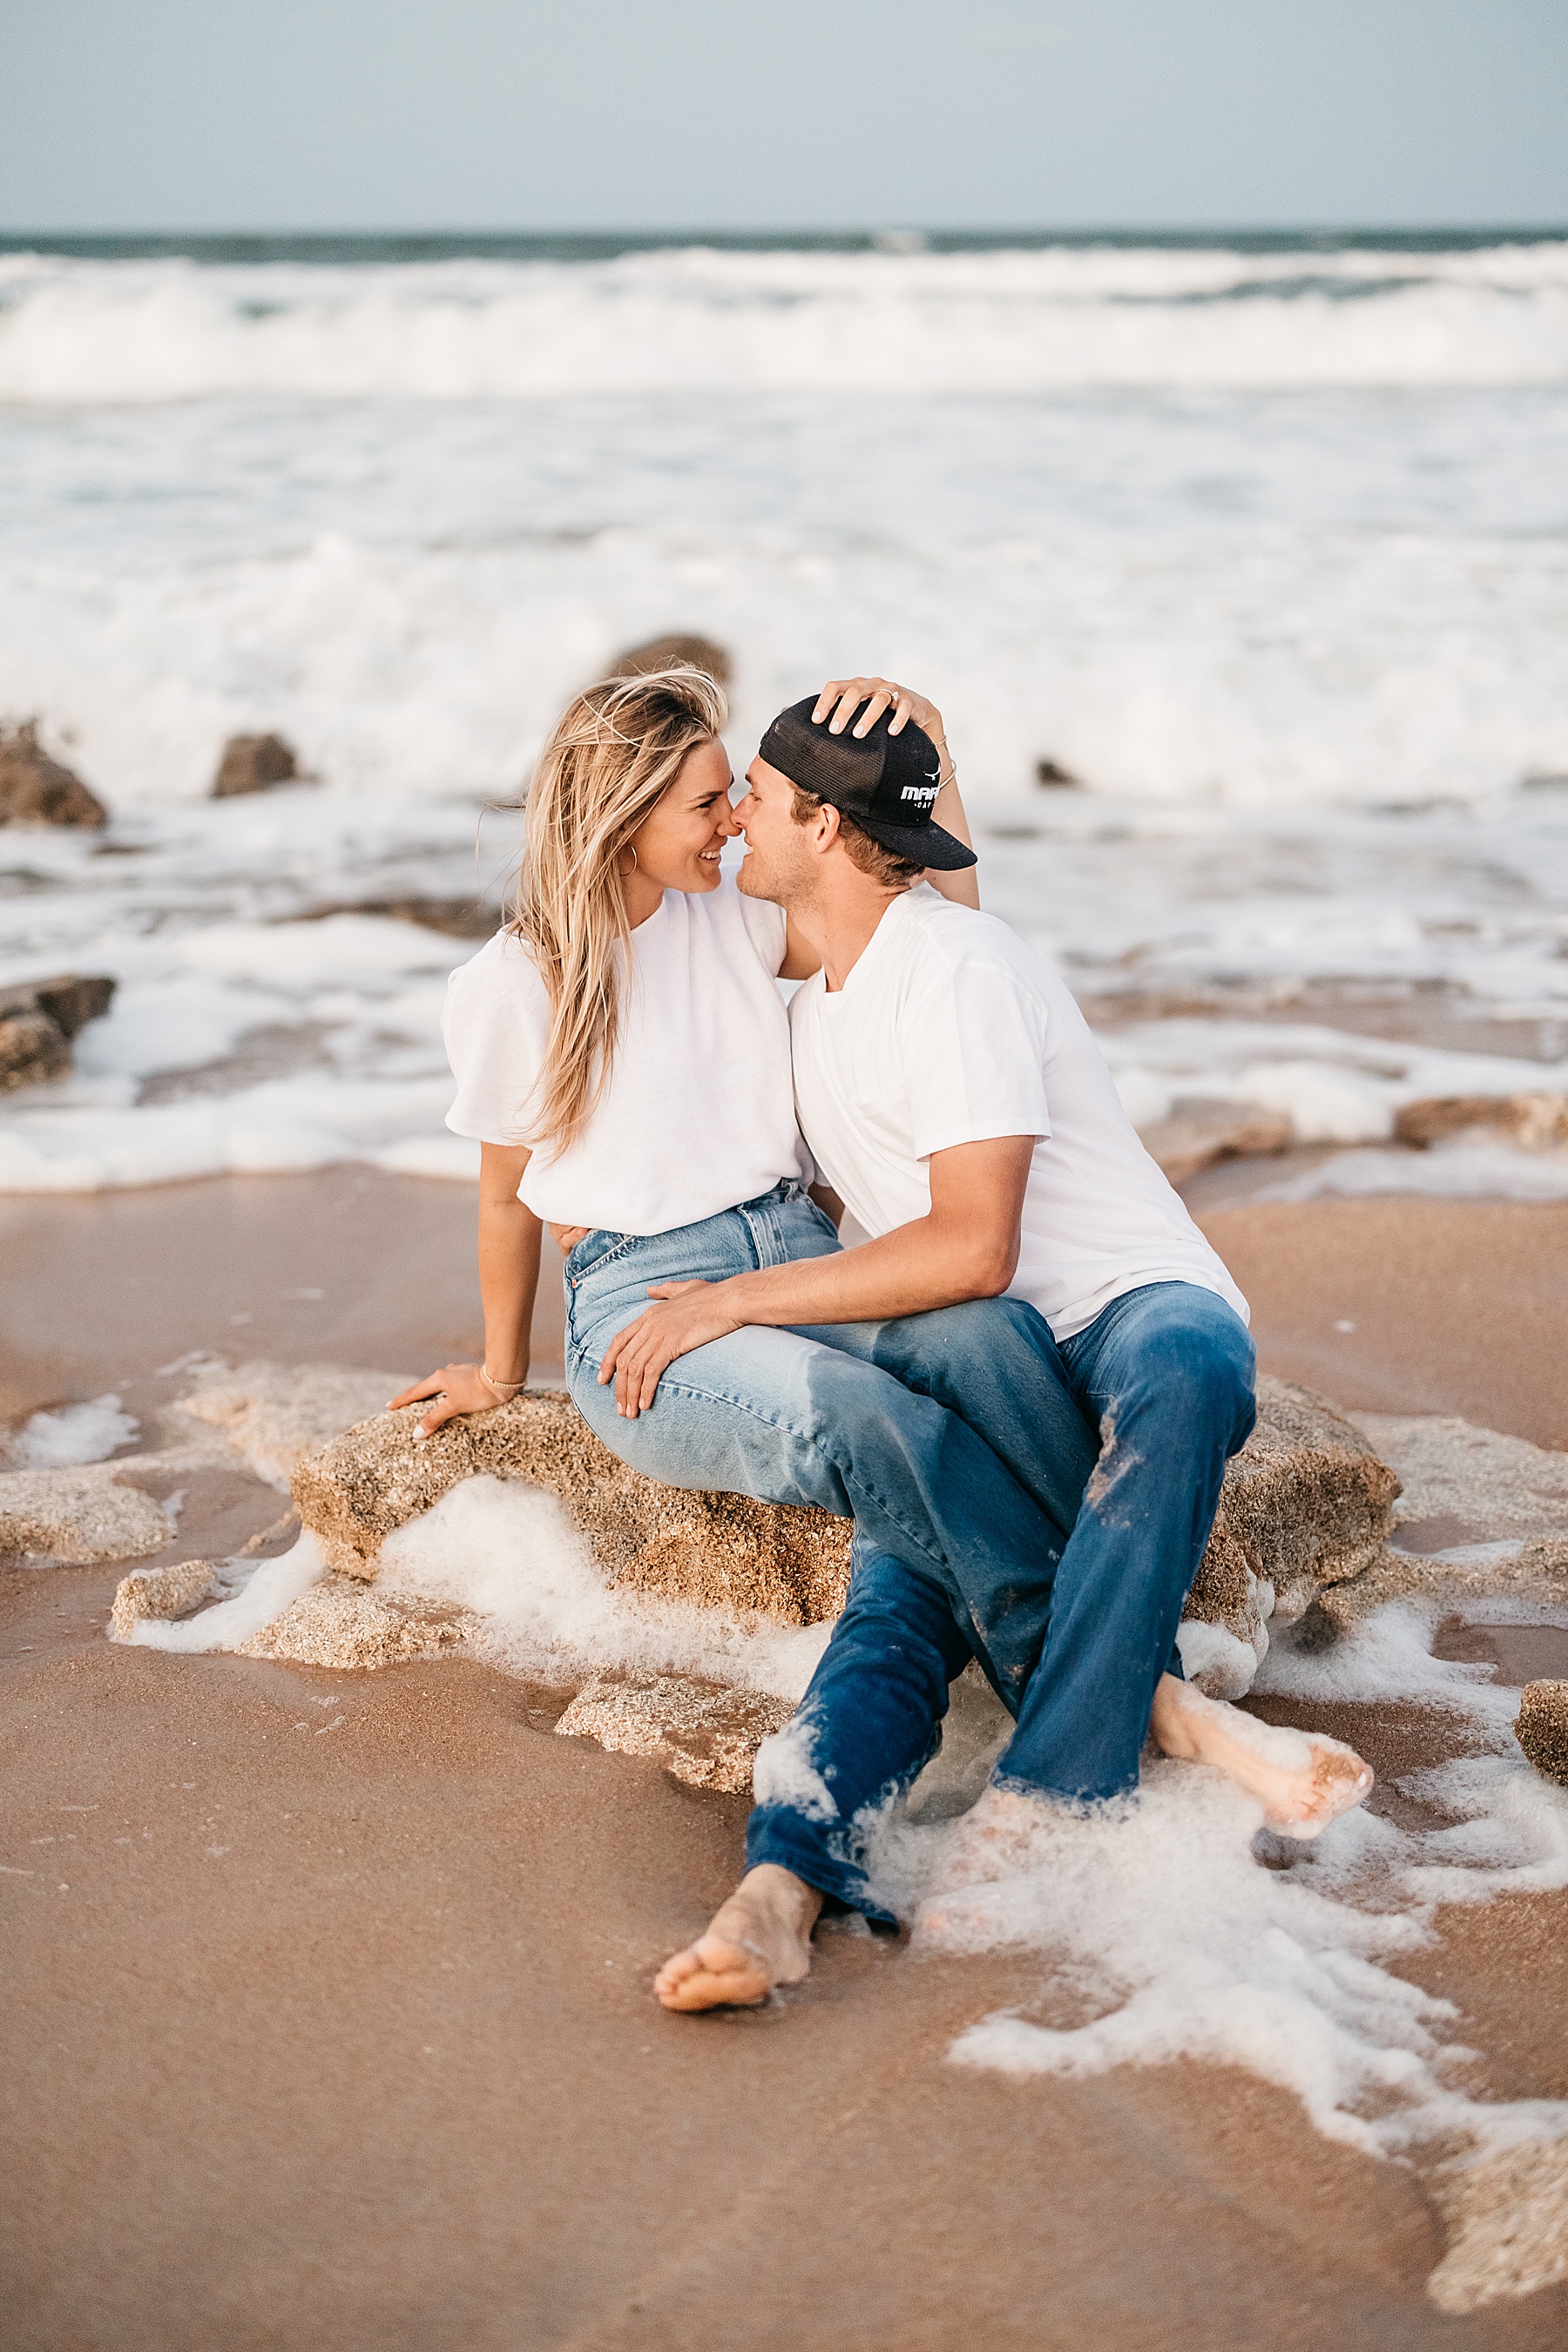 woman in white shirt and jeans sitting on rocks at the beach with man in jeans